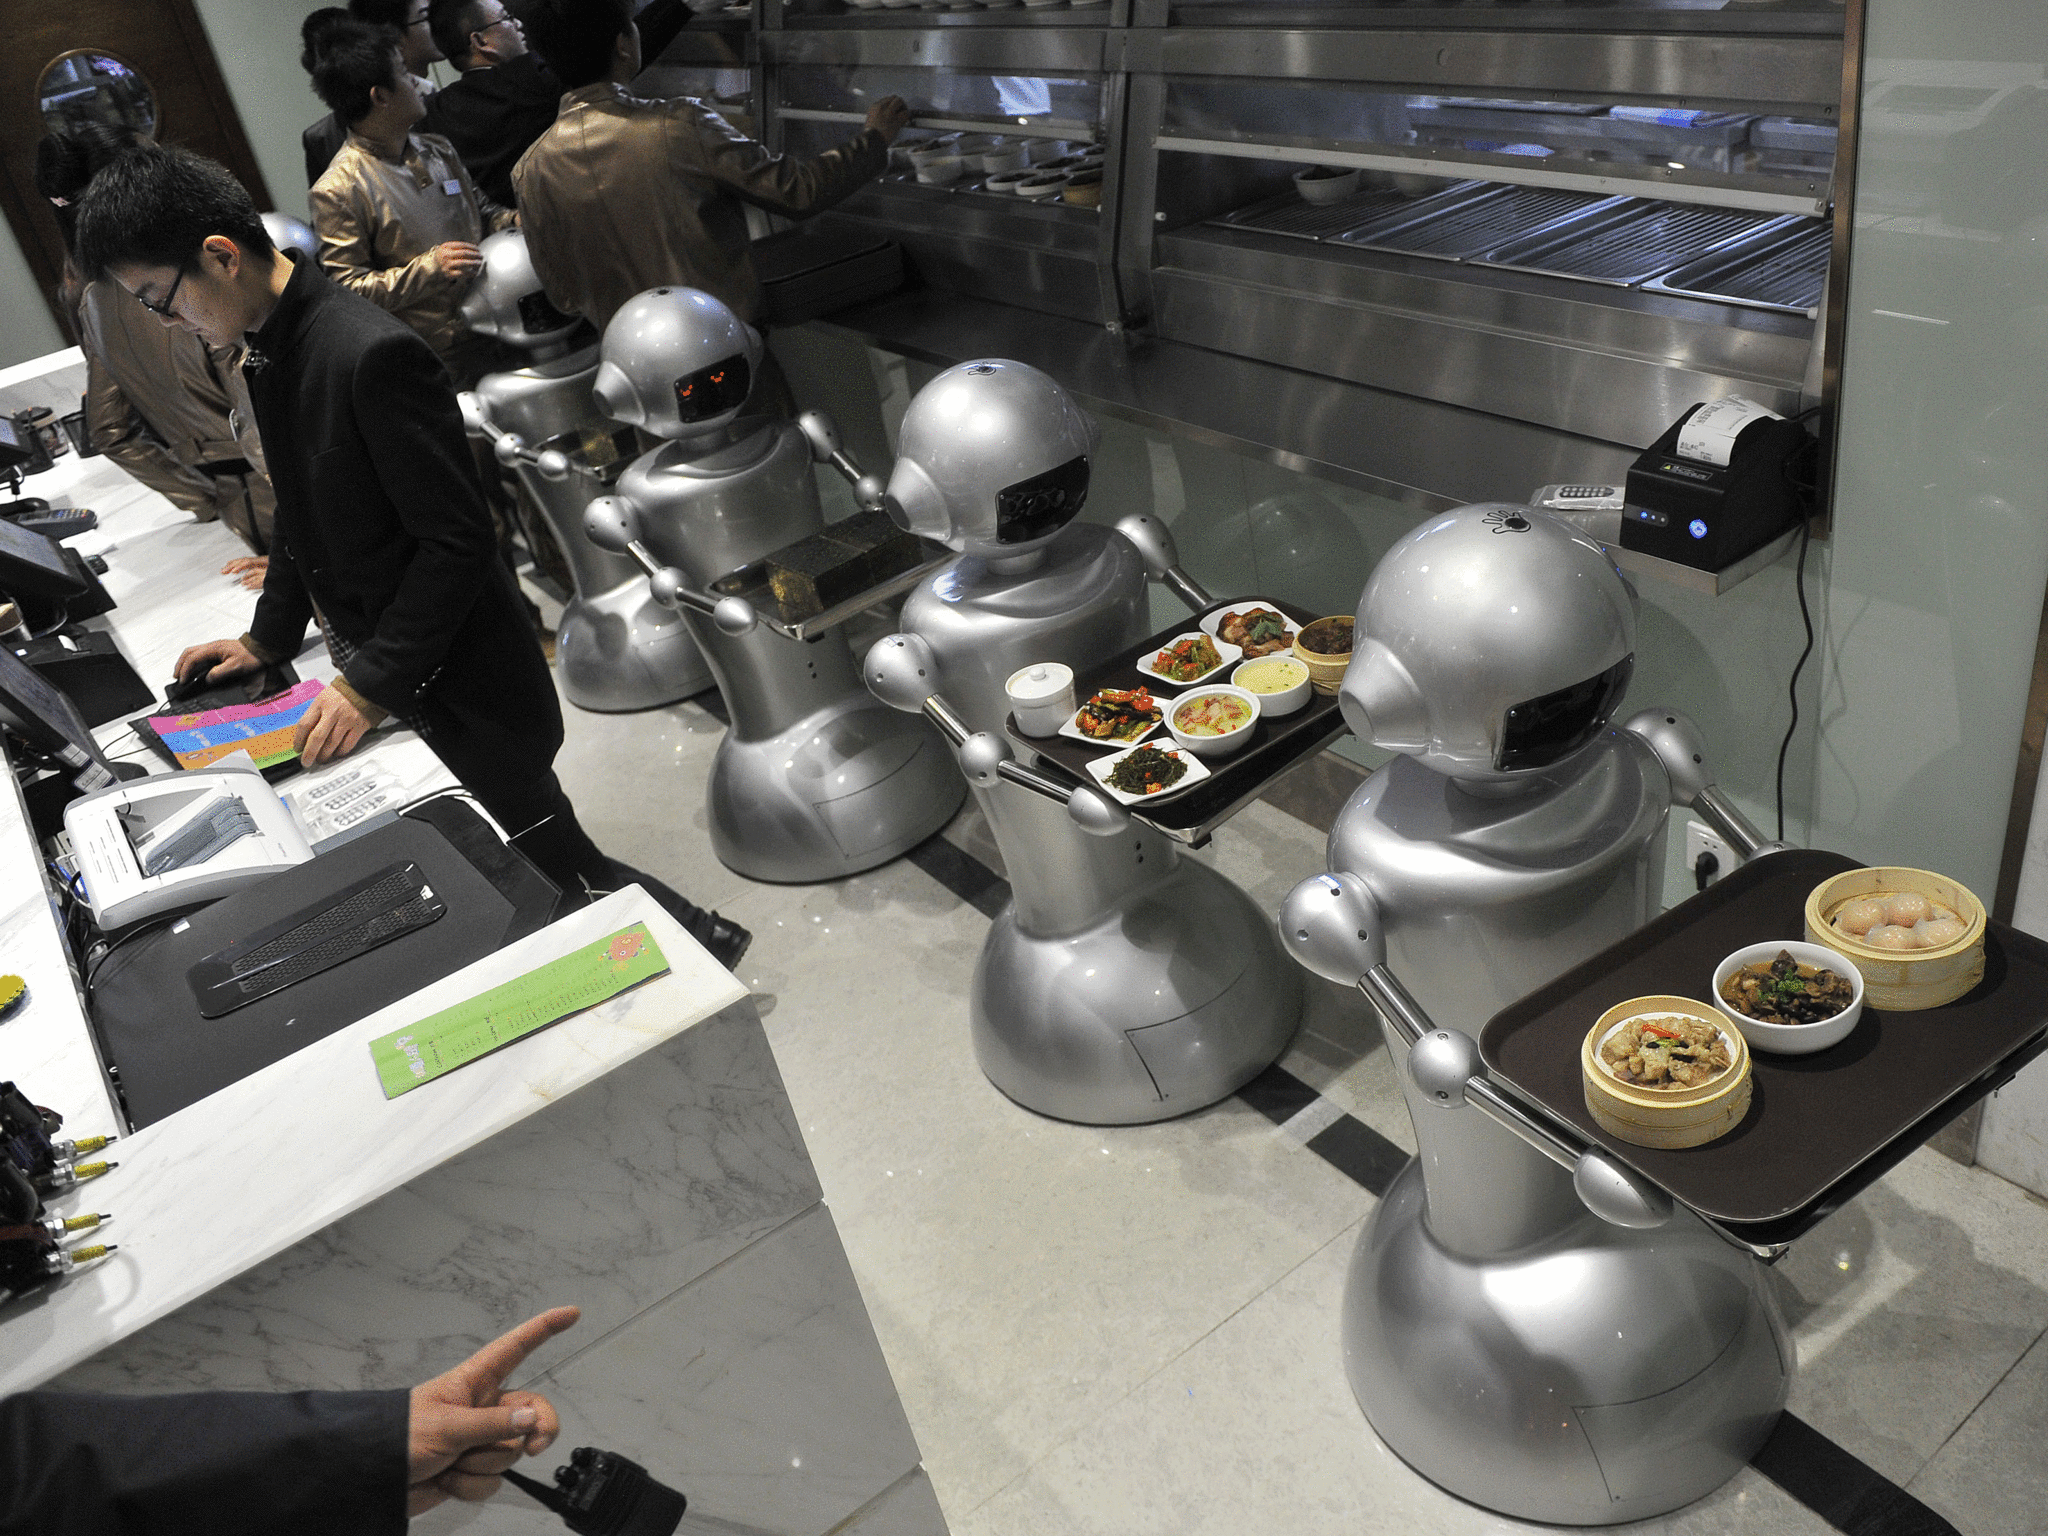 Robots wait to serve customers at a restaurant in China